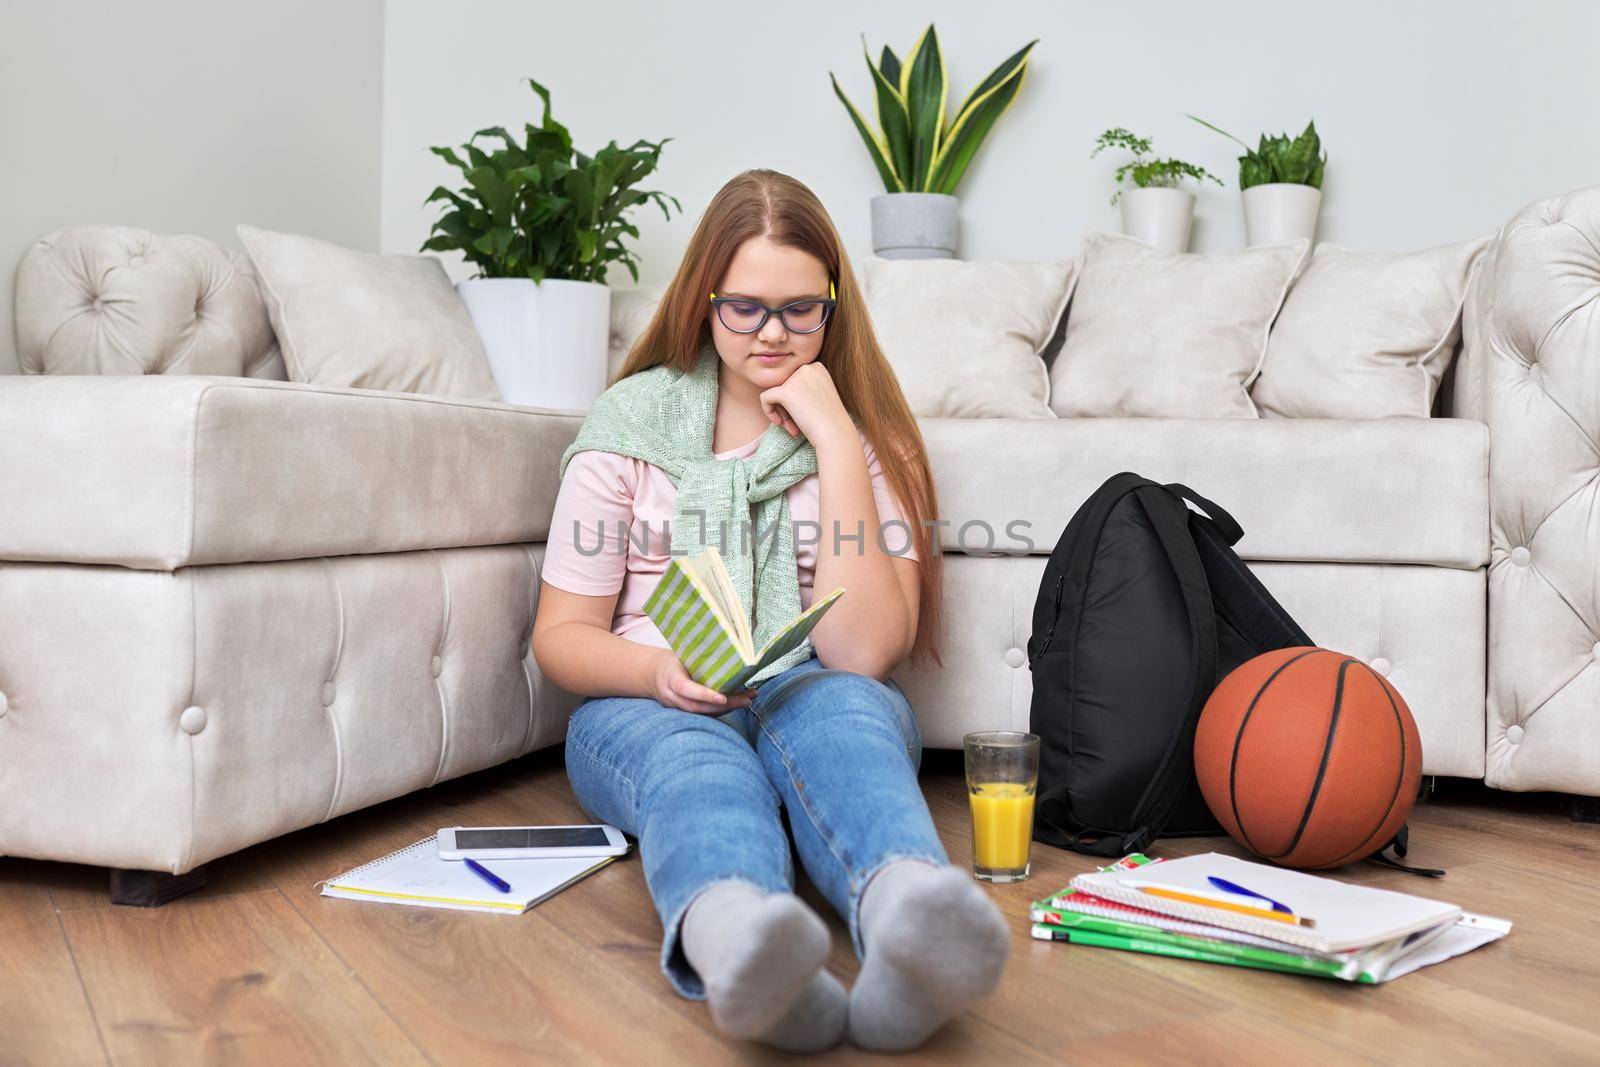 Teenage girl sitting at home on the living room floor reading book by VH-studio